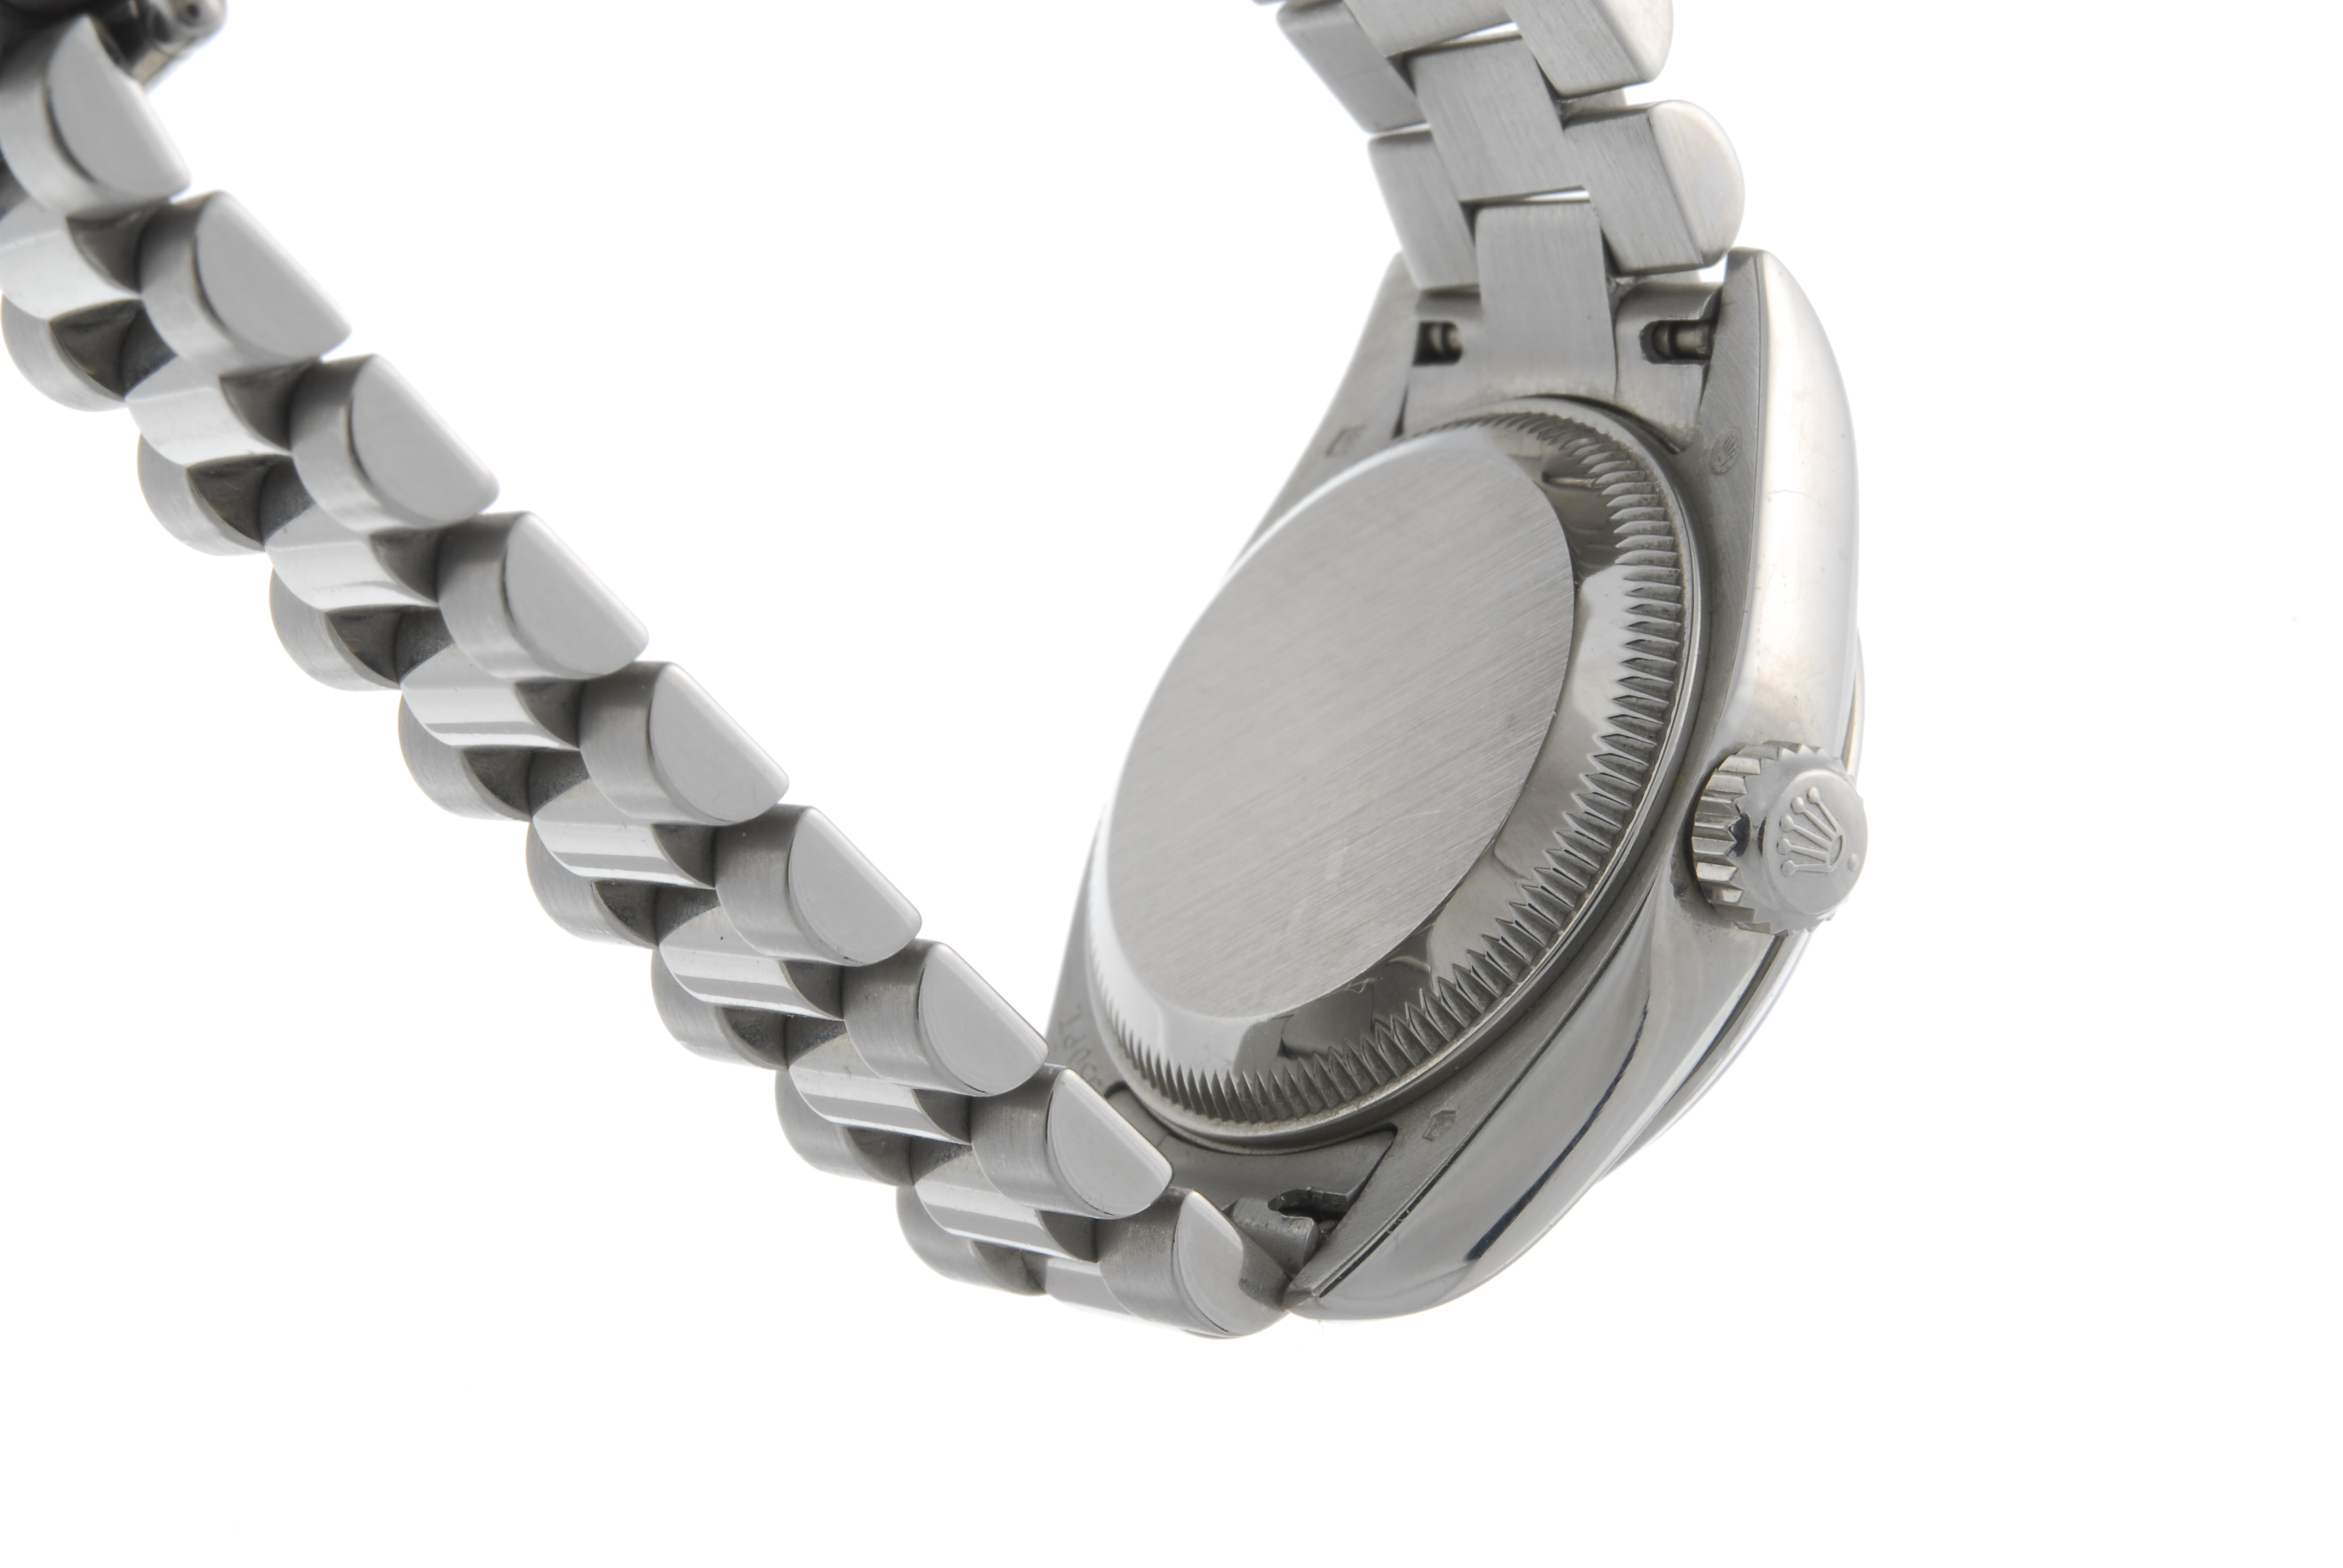 ROLEX - a lady's Oyster Perpetual Datejust bracelet watch. Circa 2000. Platinum case. Reference - Image 3 of 4